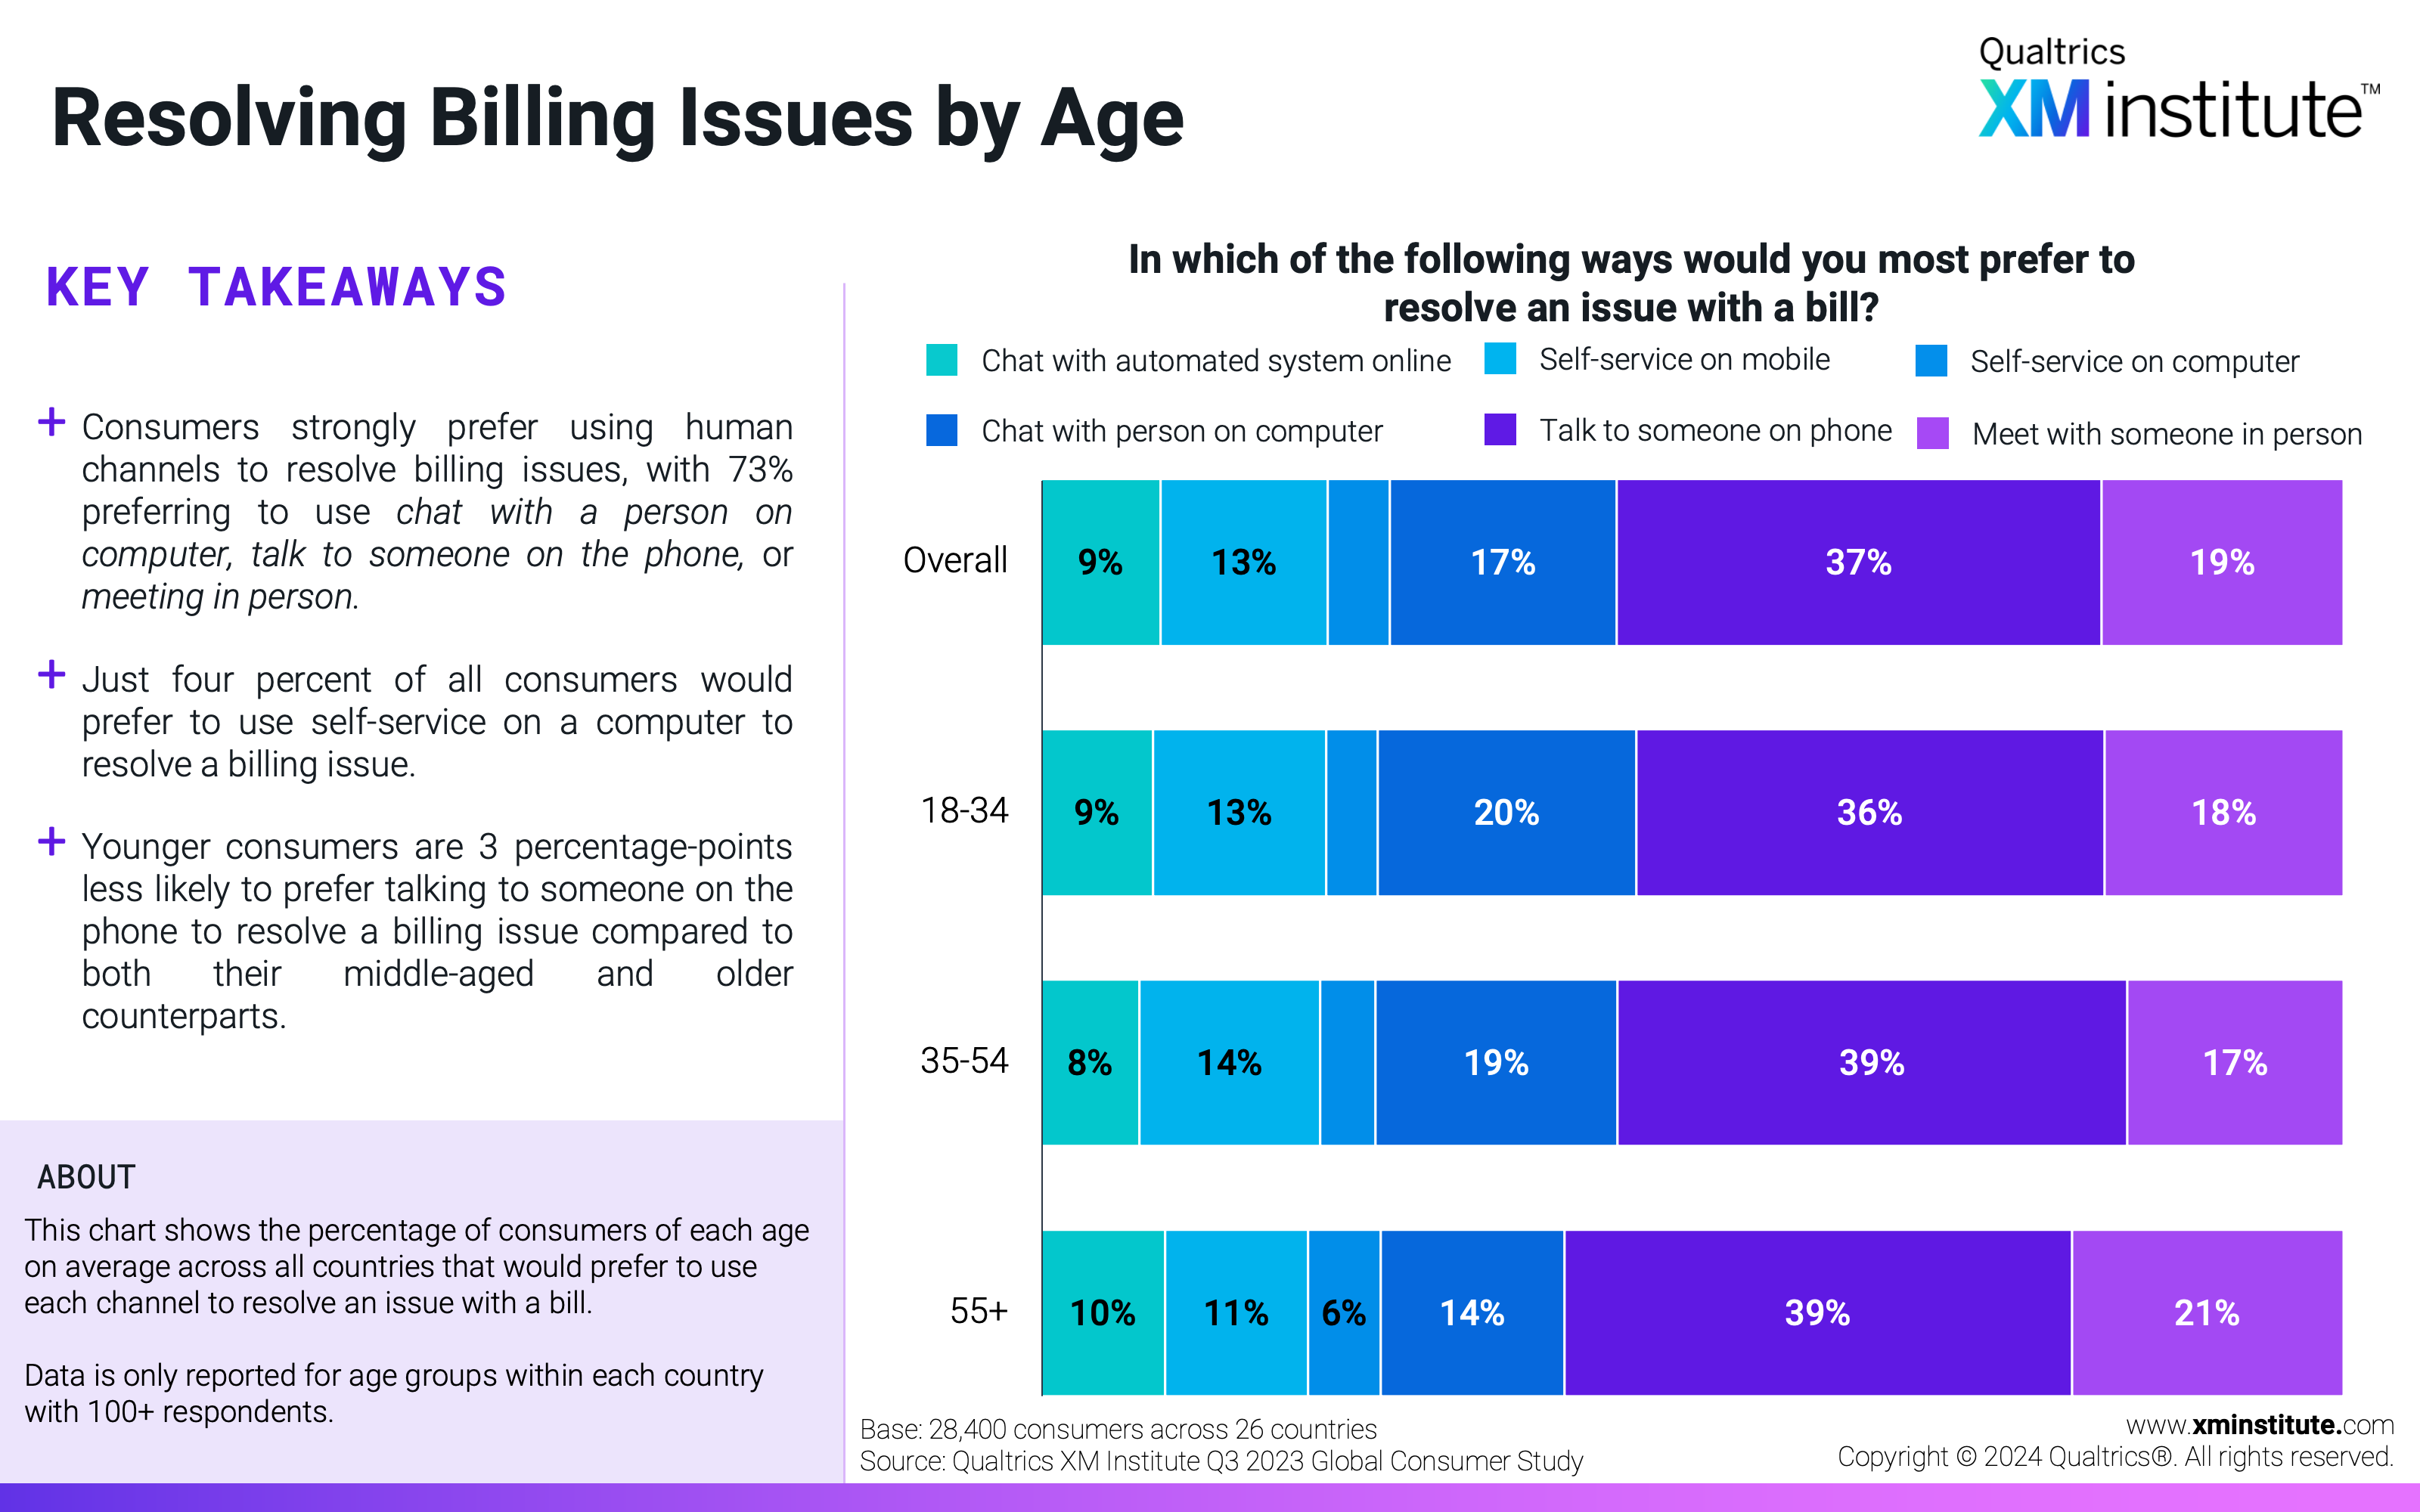 This chart shows the percentage of consumers of each age on average across all countries that would prefer to use each channel to resolve an issue with a bill. 